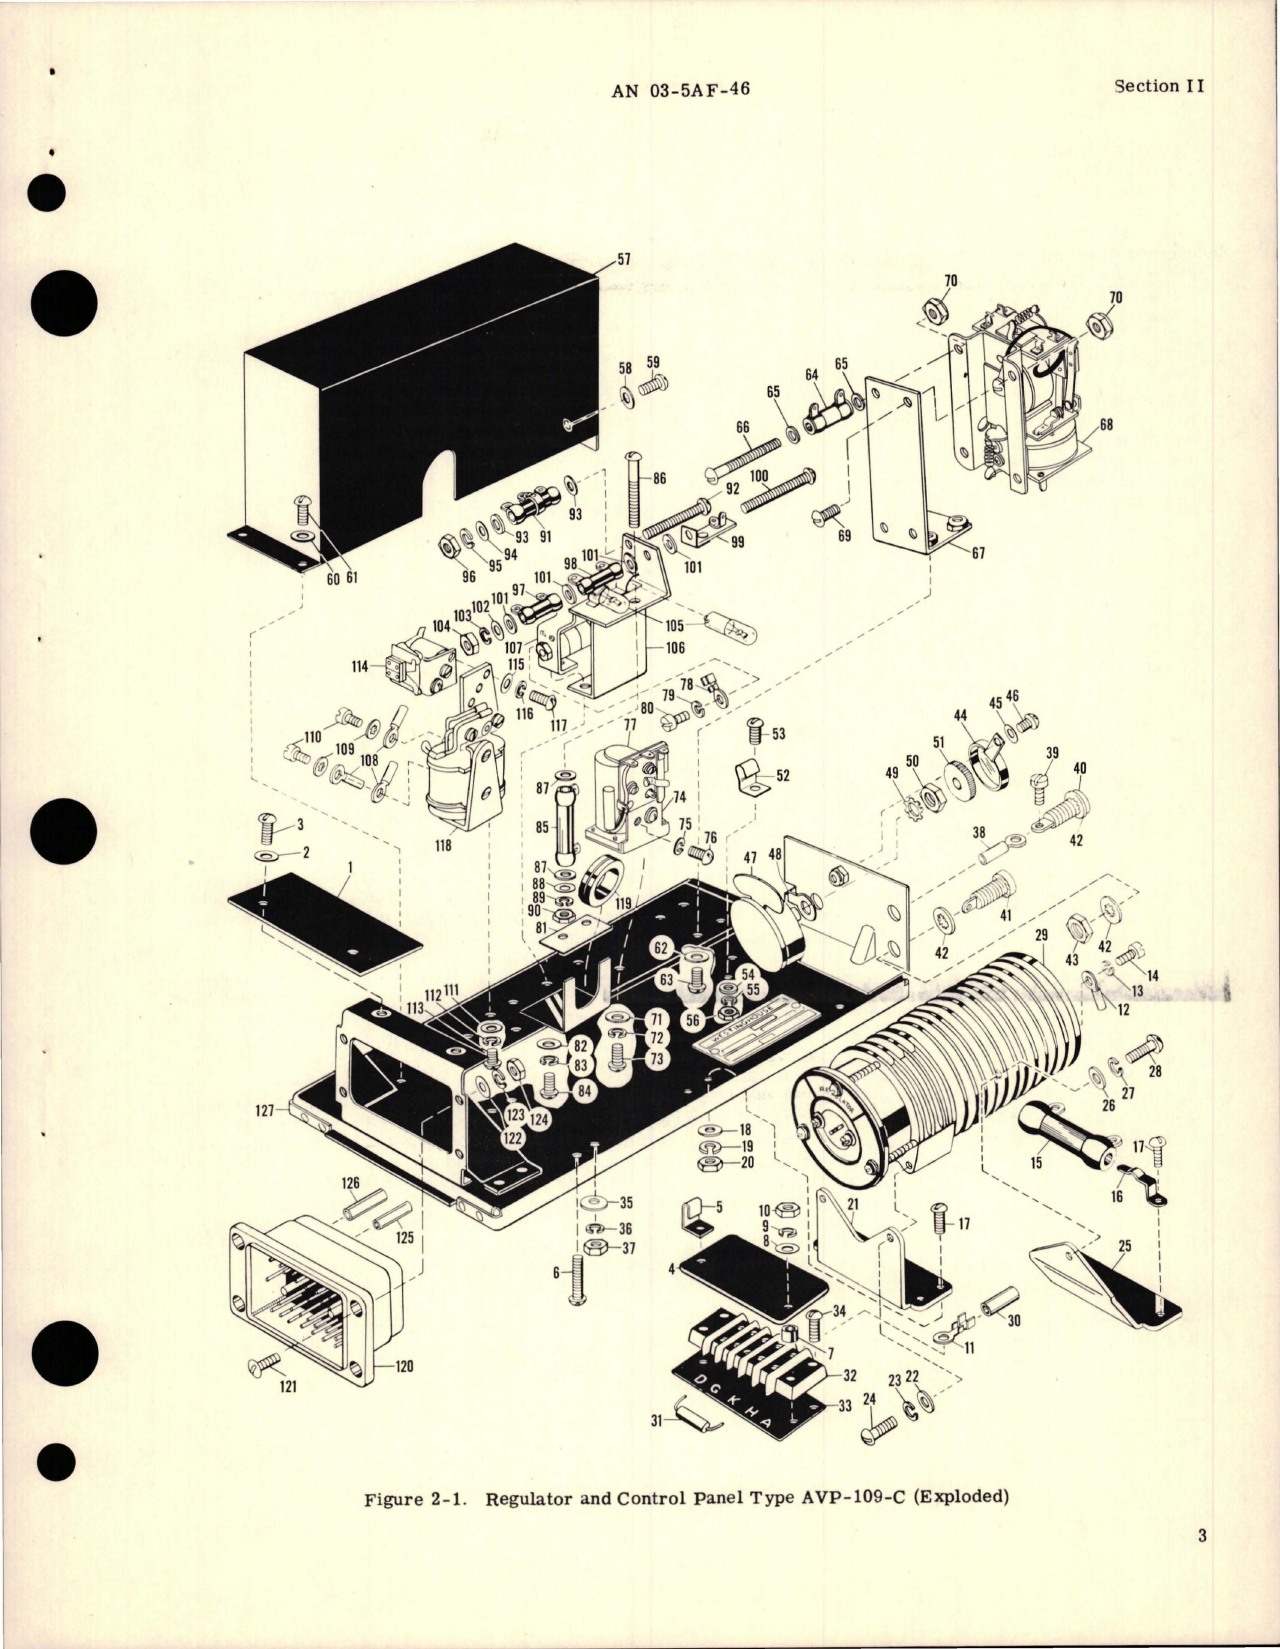 Sample page 7 from AirCorps Library document: Overhaul Instructions for Regulator and Control Panel - Type AVP-109-C 